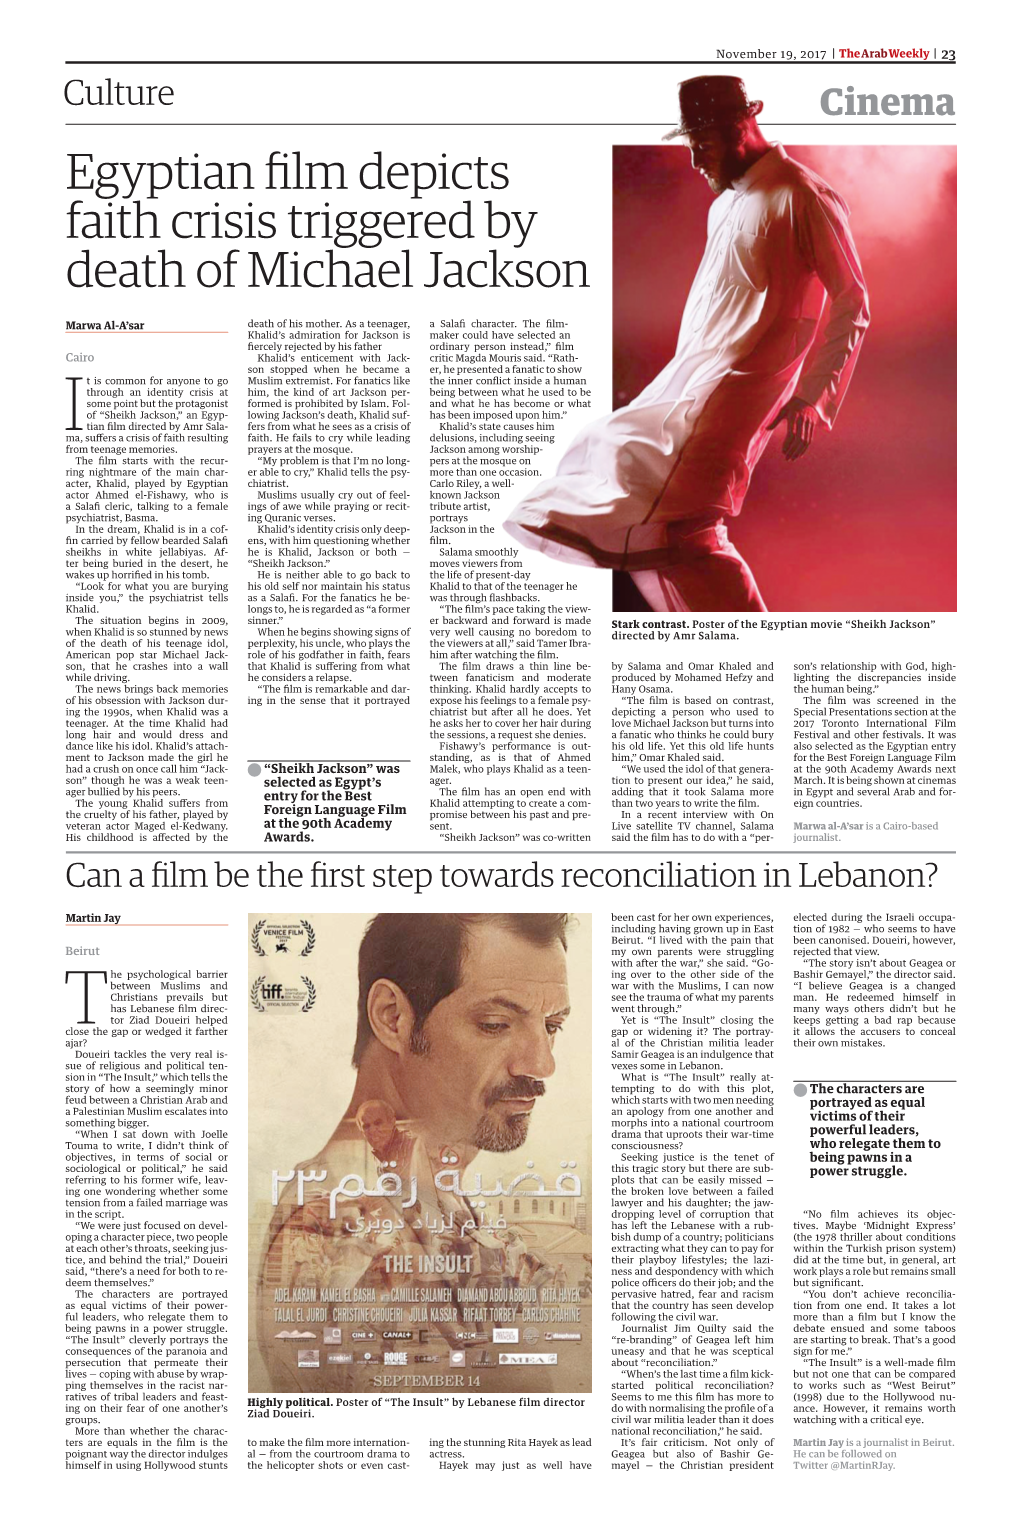 Egyptian Film Depicts Faith Crisis Triggered by Death of Michael Jackson